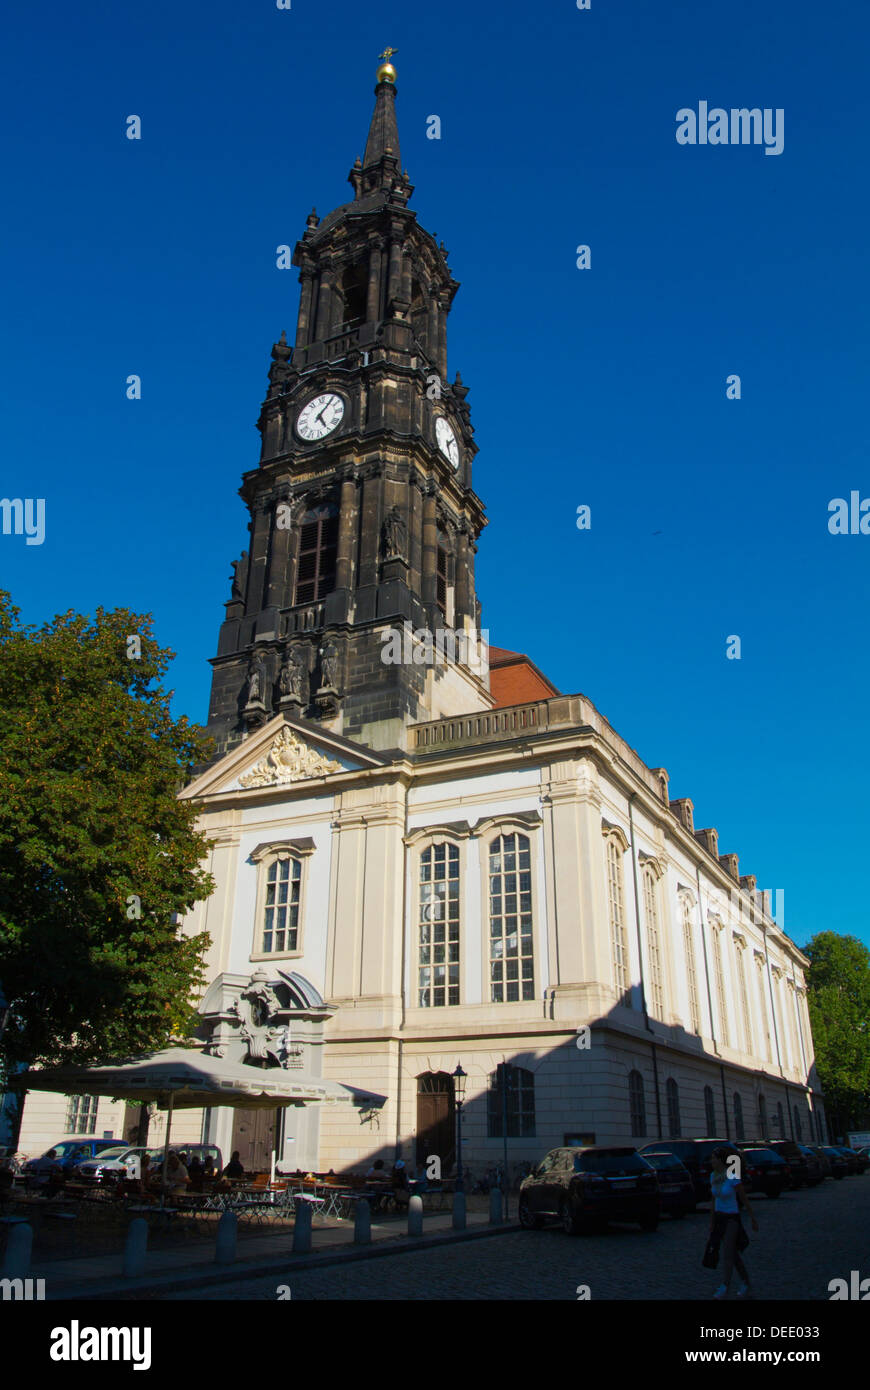 Dreikönigskirche the Church of Three Kings in Neustadt the new town Dresden eastern Germany central Europe Stock Photo